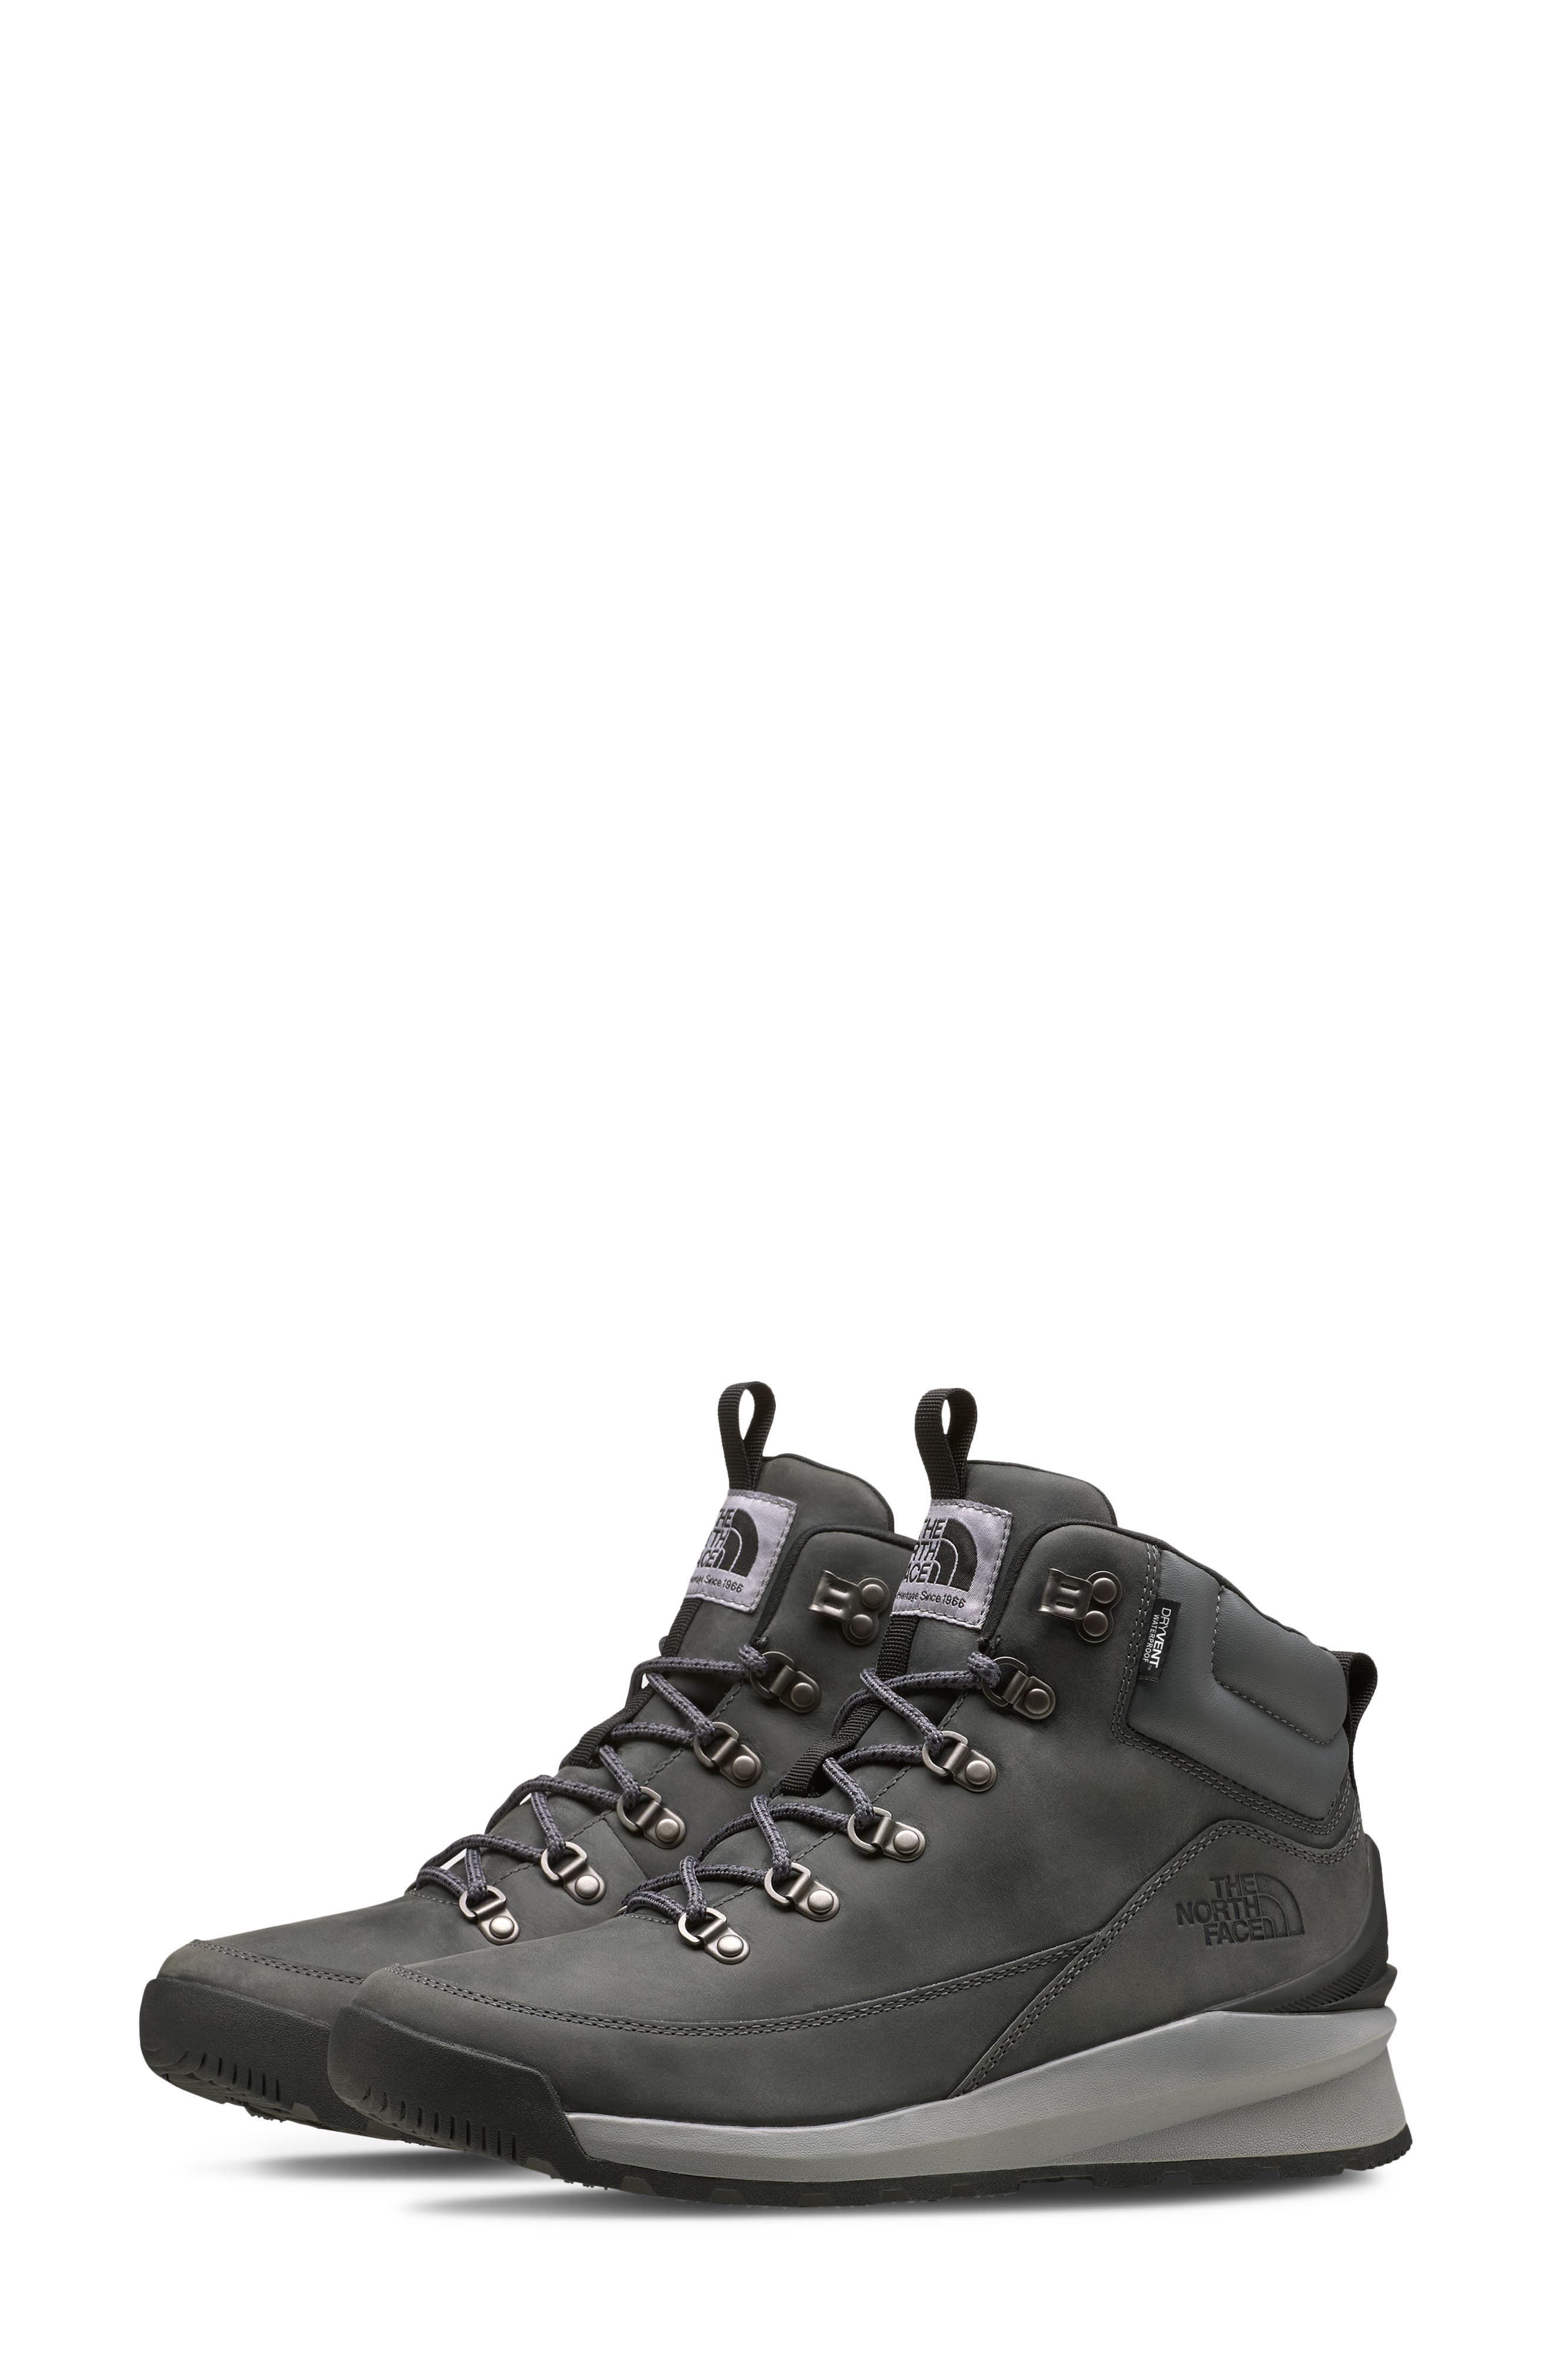 Mens The North Face Boots | Nordstrom